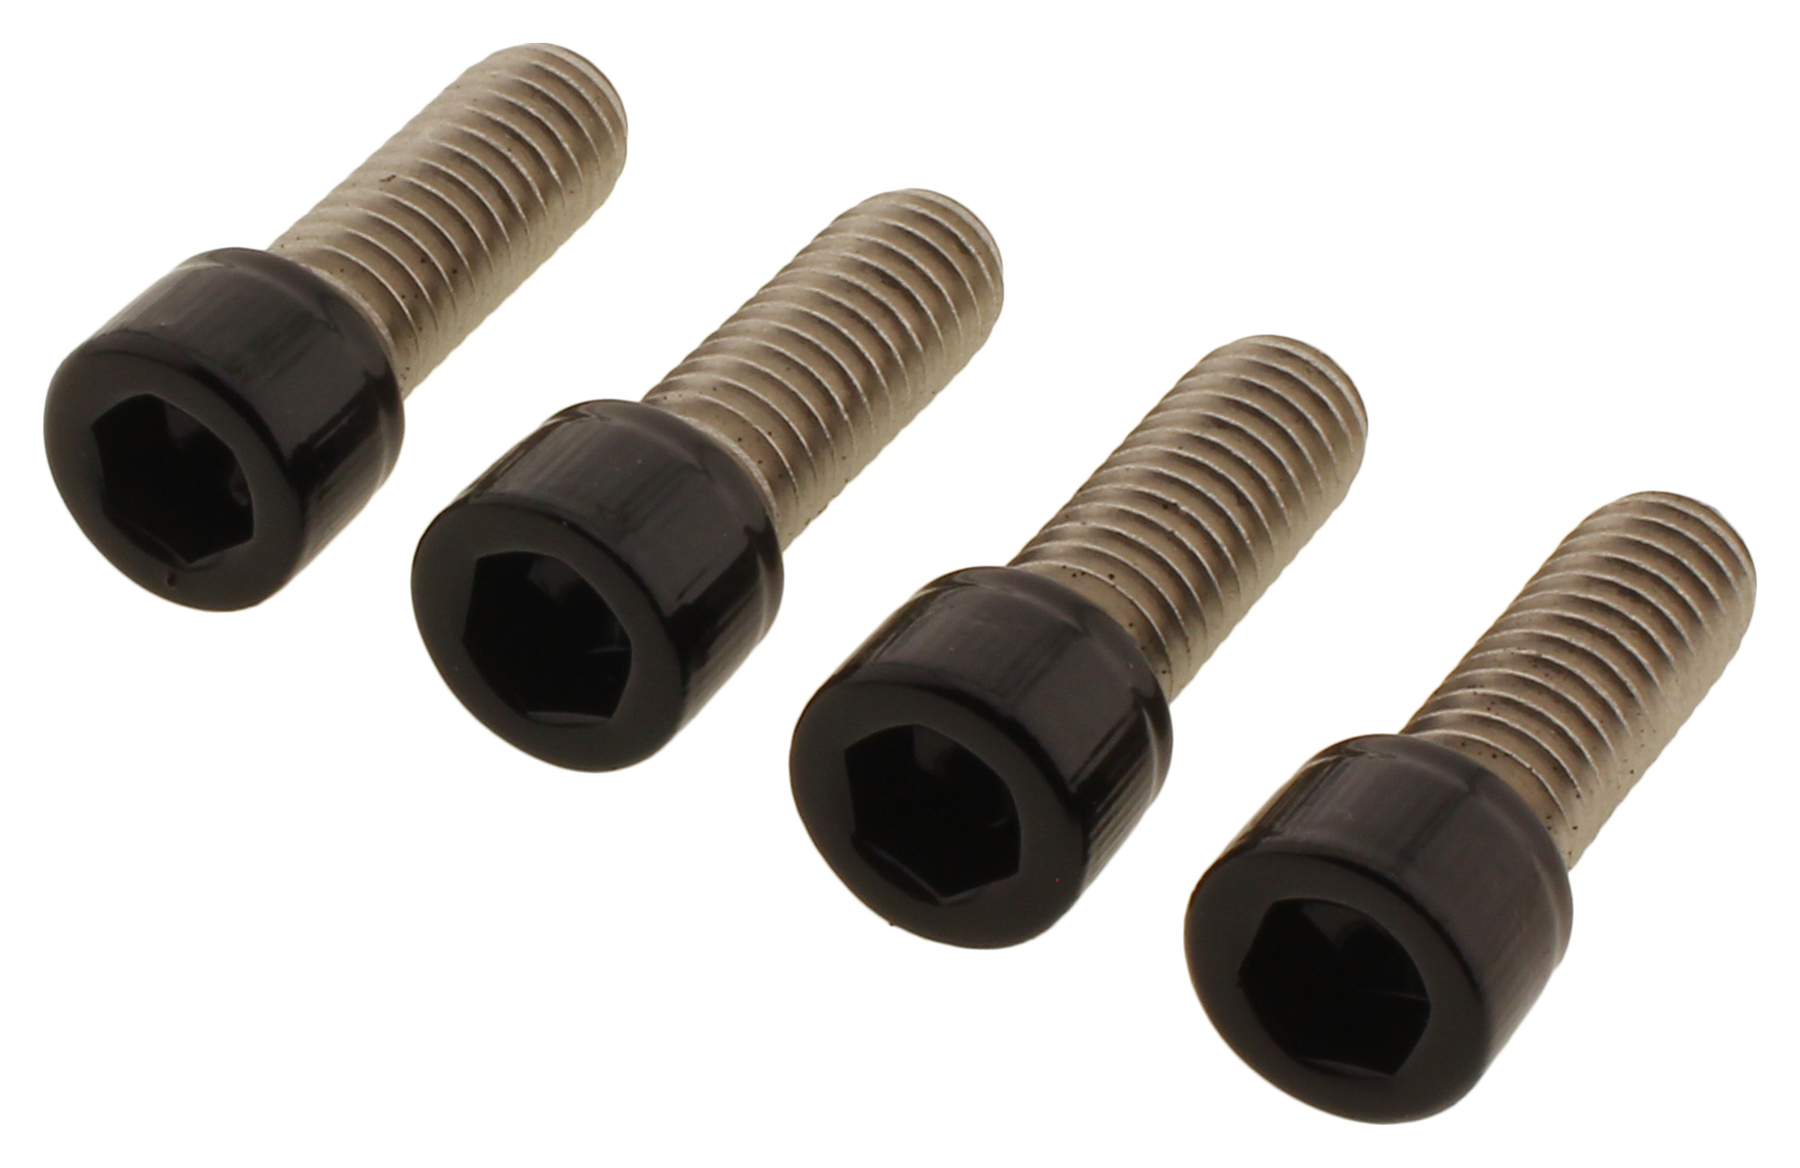 Screws 4 Bikes Bolt sets for HD riser pure, flat black and glossy